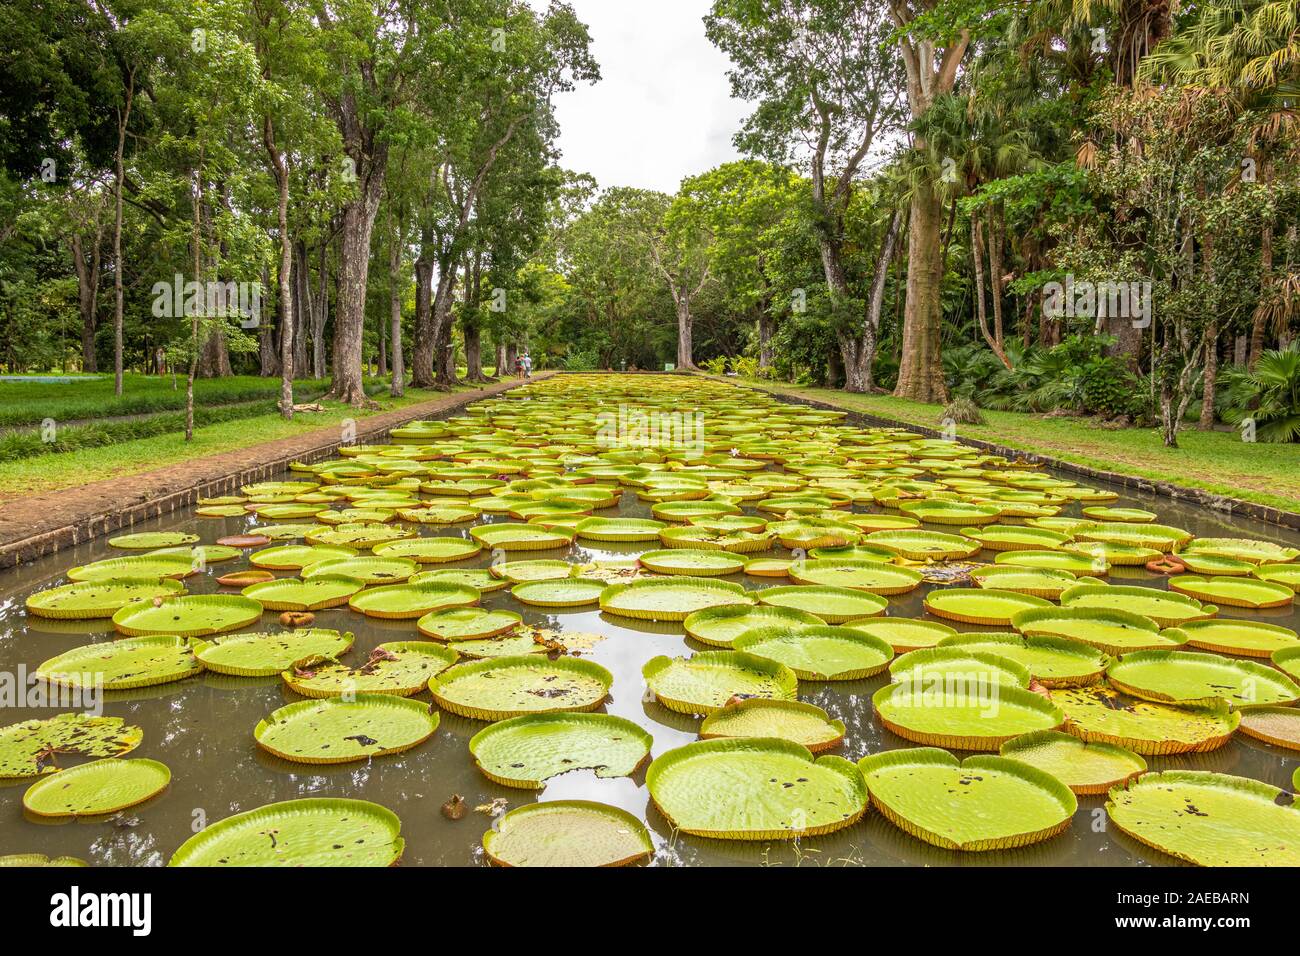 Majestic pond with giant water lilies in the botanical garden of Pampelmousses, Mauritius. Stock Photo